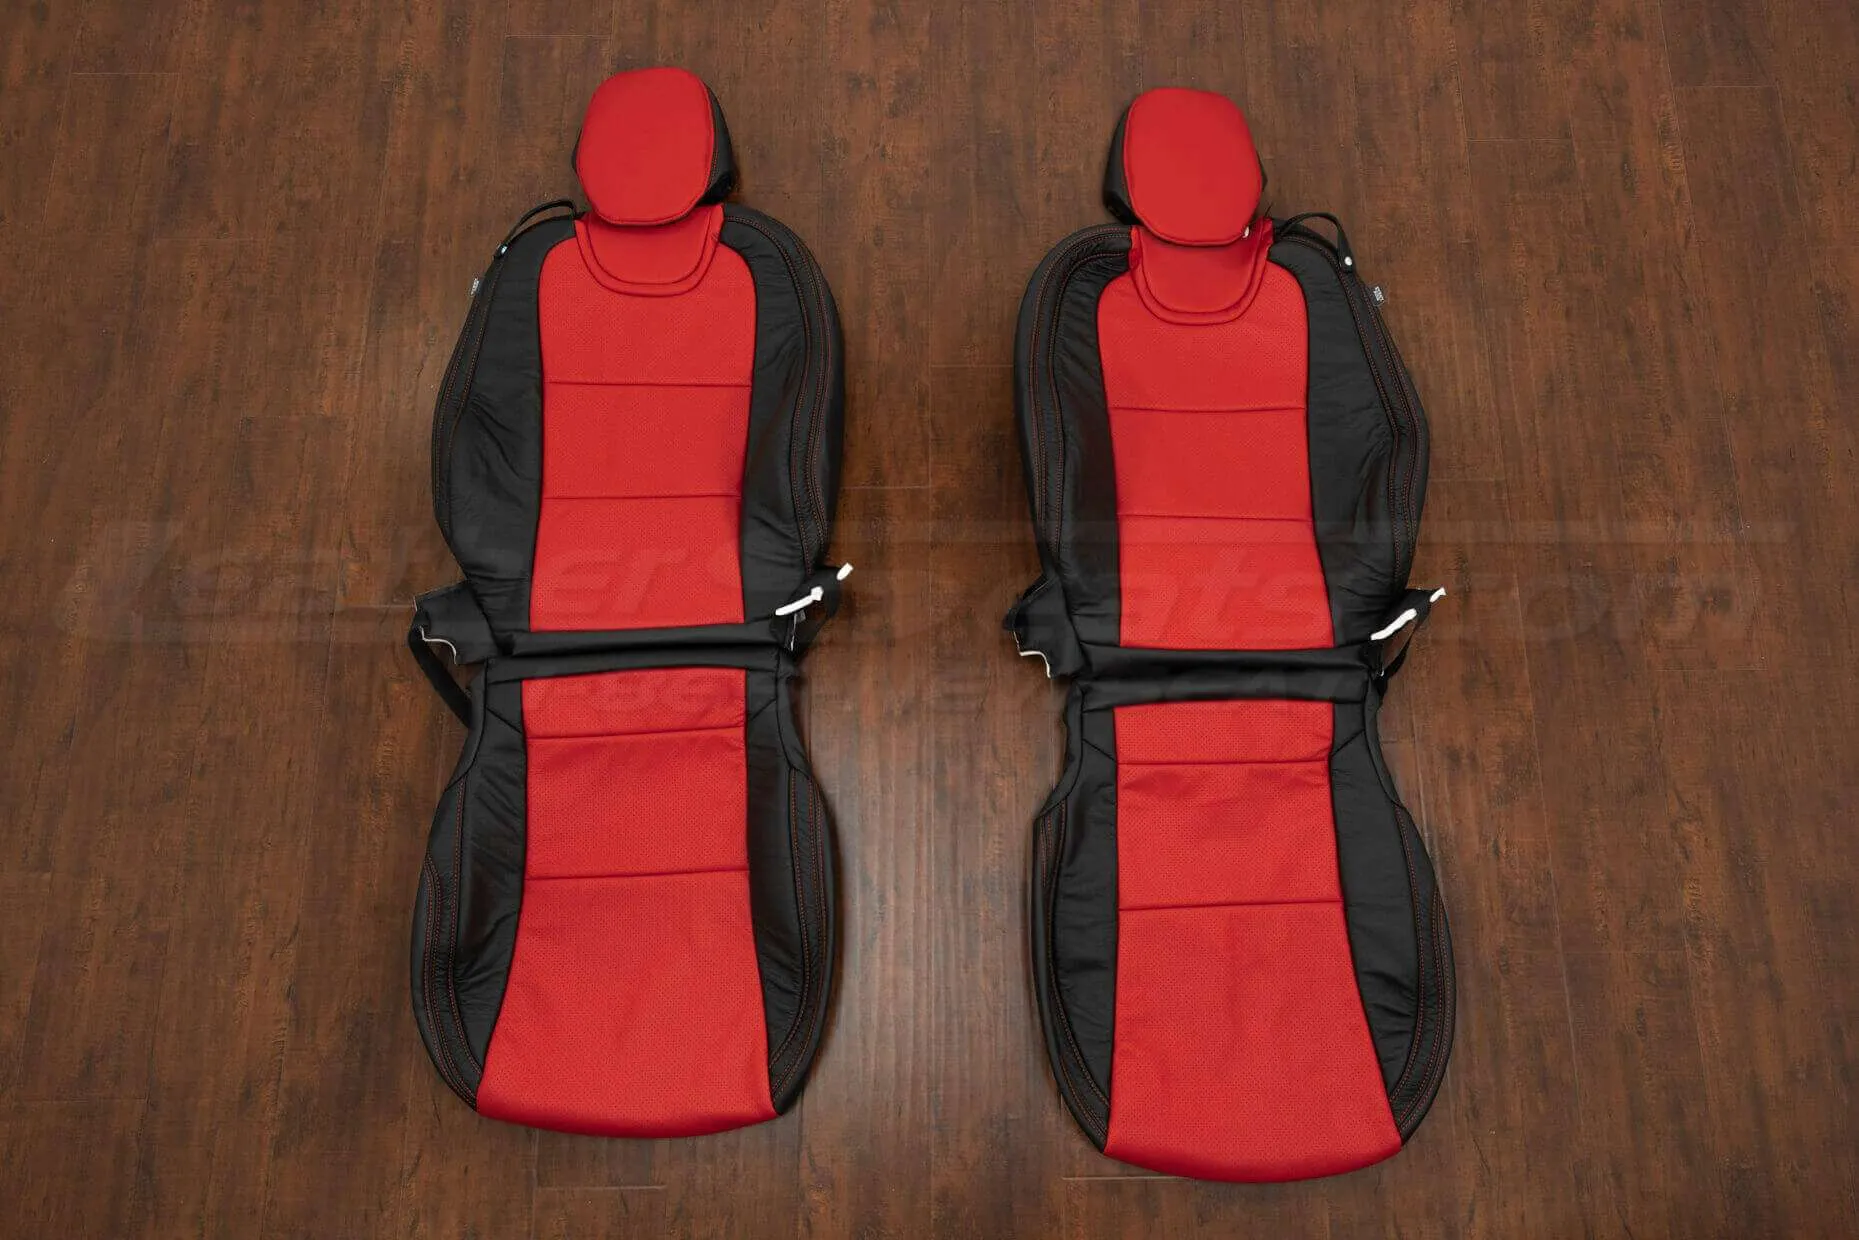 Chevrolet Camaro Leather Kit - Black & Bright Red - Front Seat Upholstery